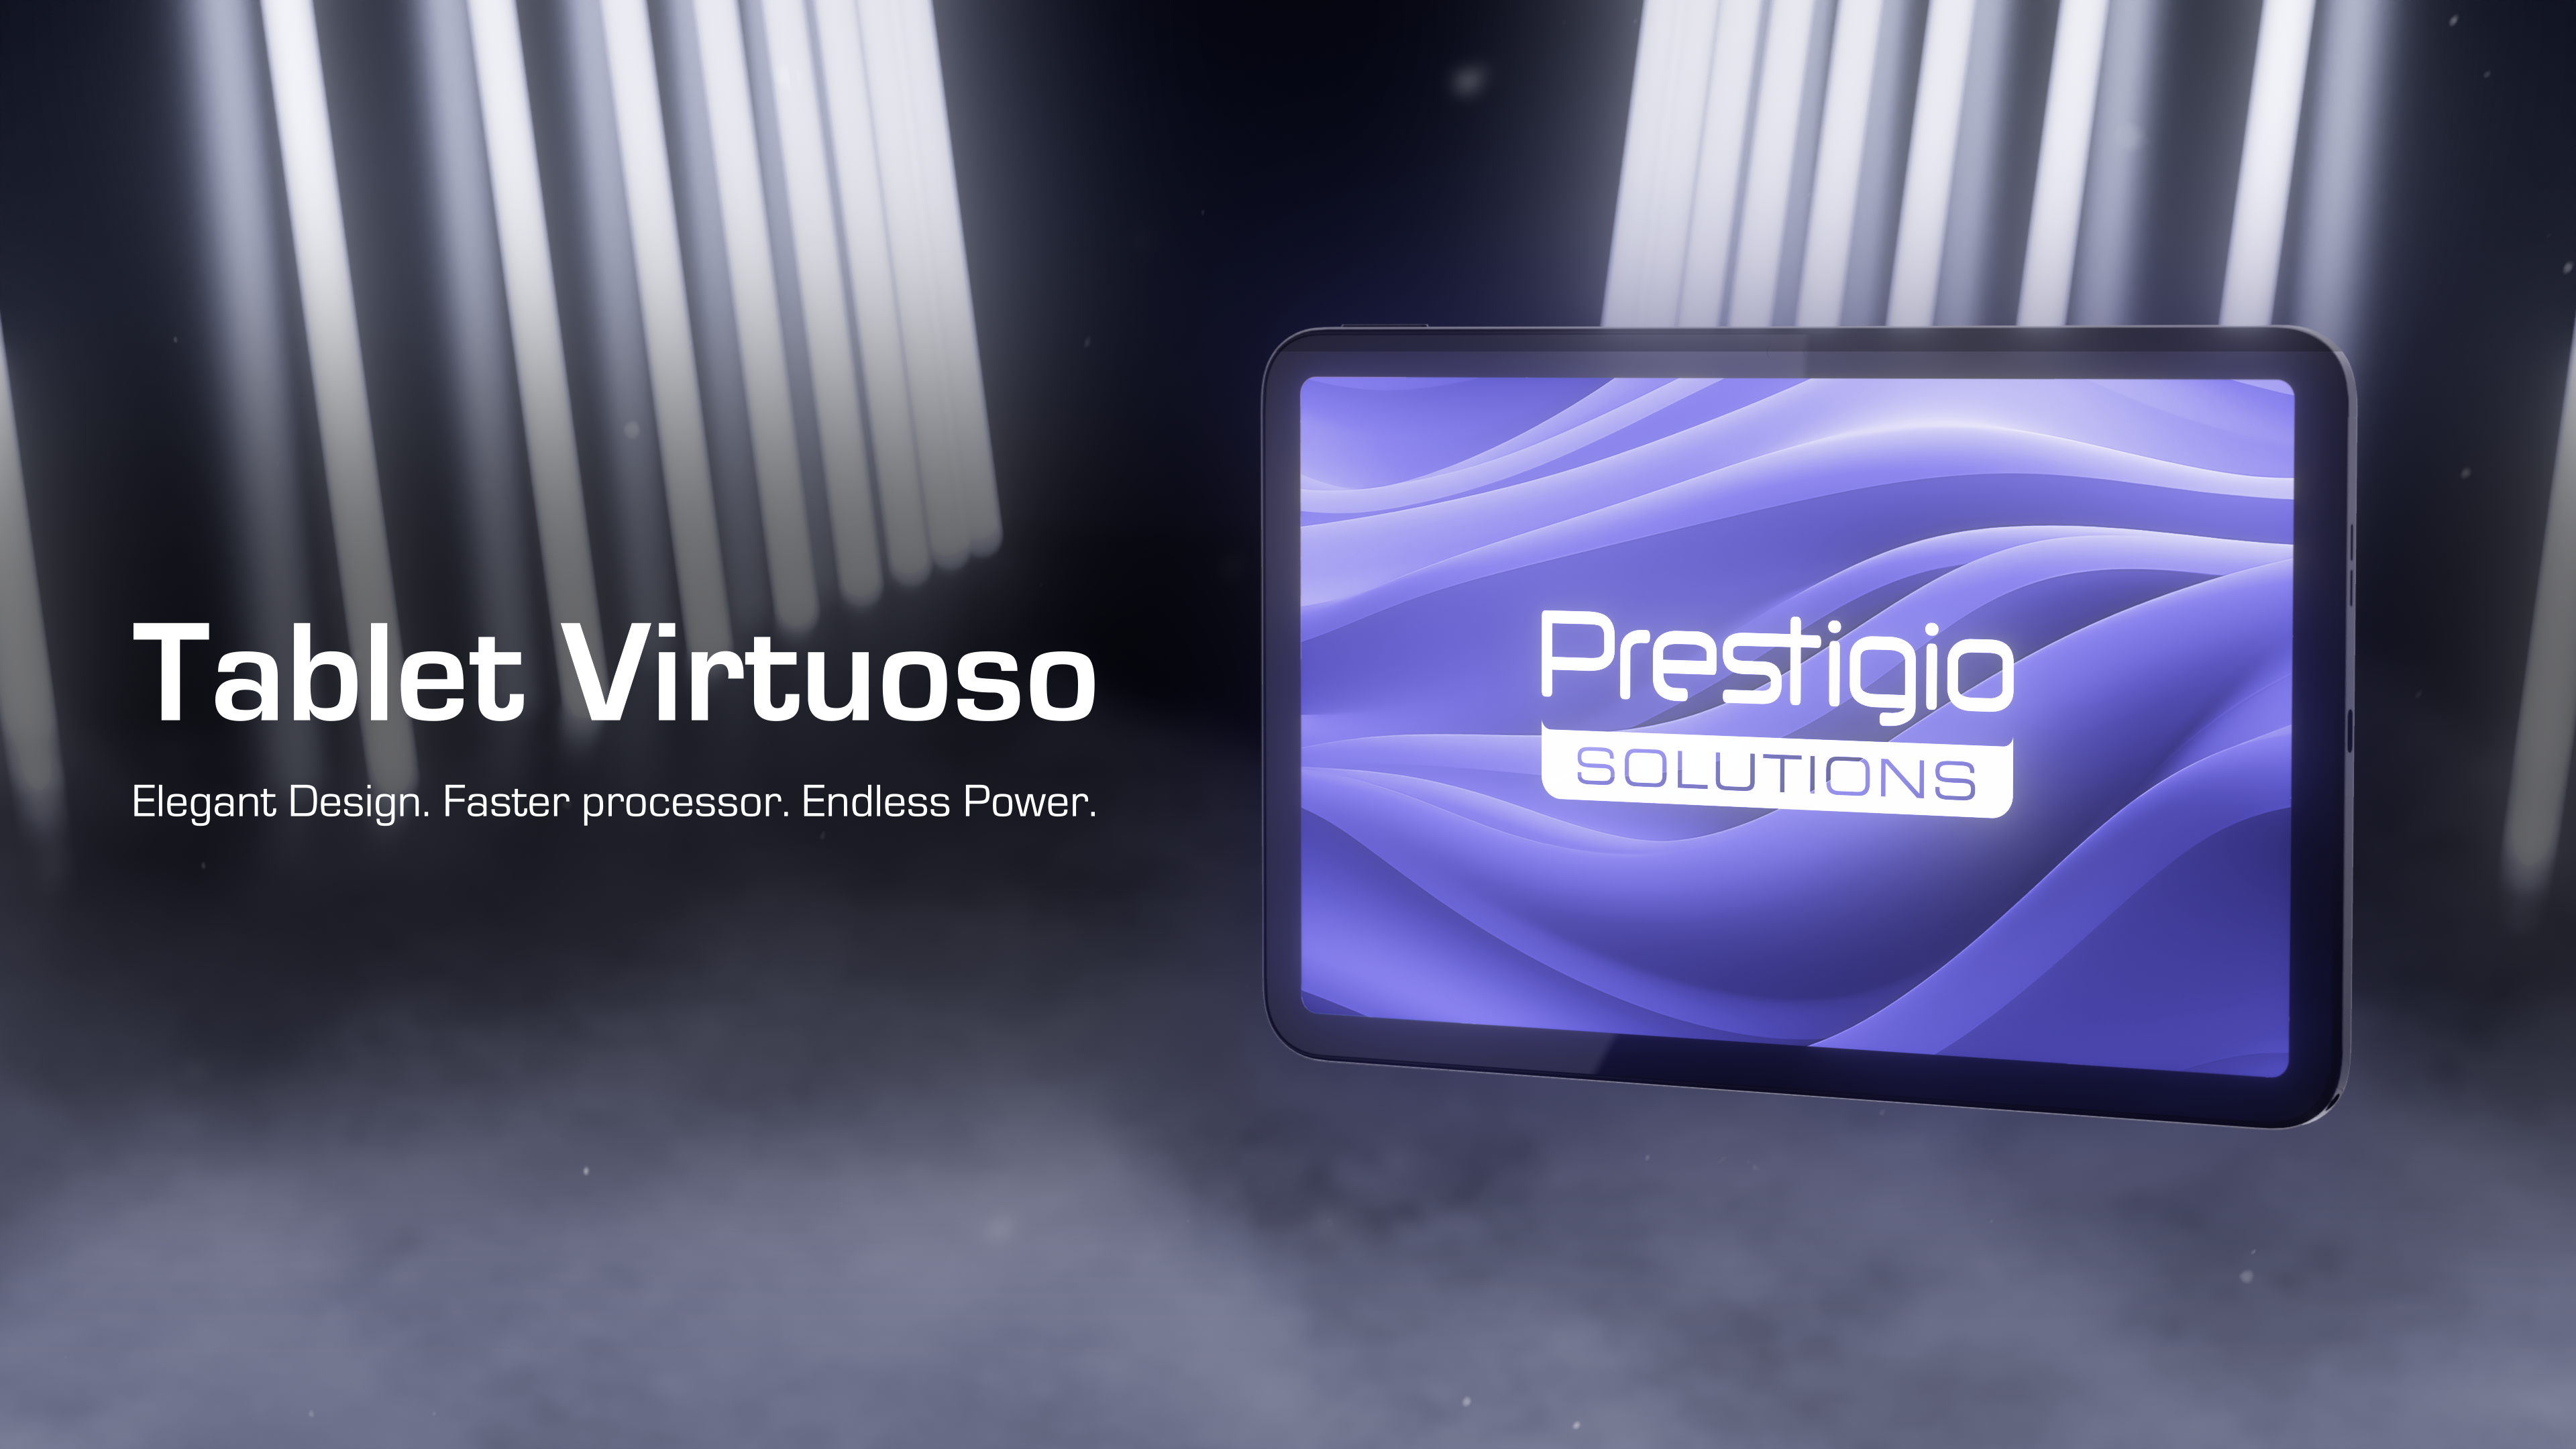 Tablet Virtuoso from Prestigio Solutions: the first of its kind in the tablet category